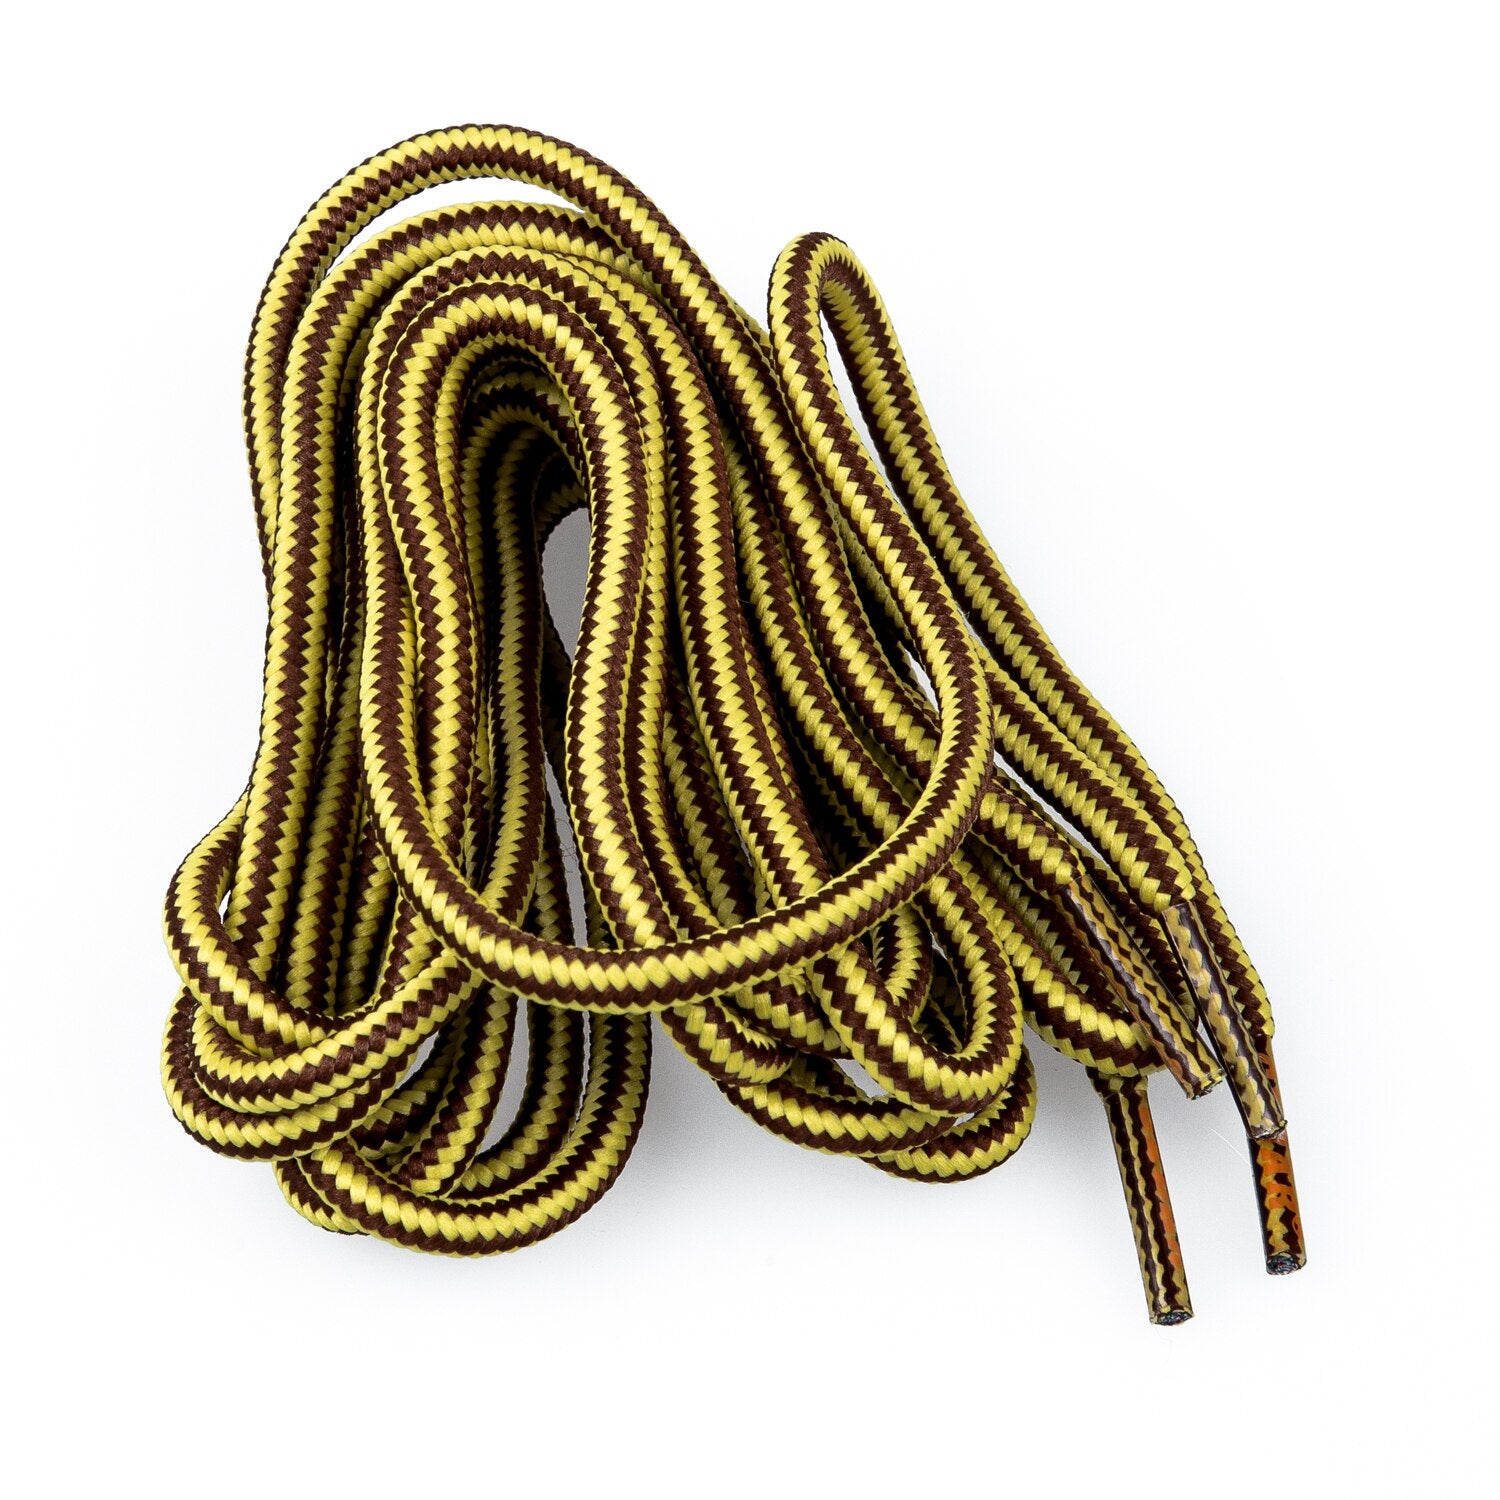 New 1 pair 152 cm Sustainable High Resistance Laces for Hiking Shoes - Cinnamon Stripes - ebowsos